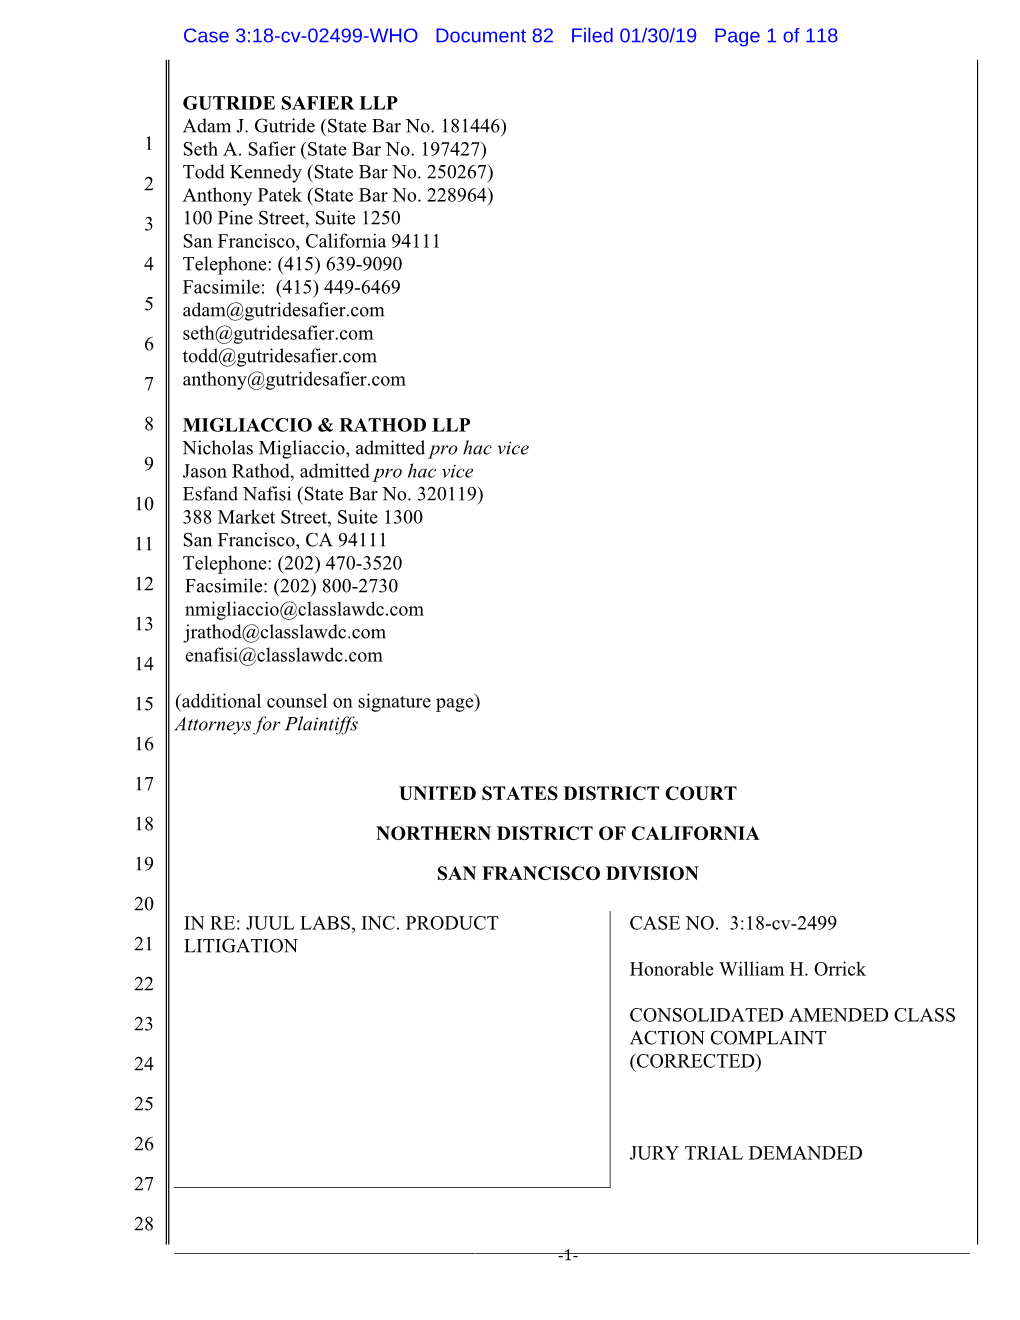 Case 3:18-Cv-02499-WHO Document 82 Filed 01/30/19 Page 1 of 118